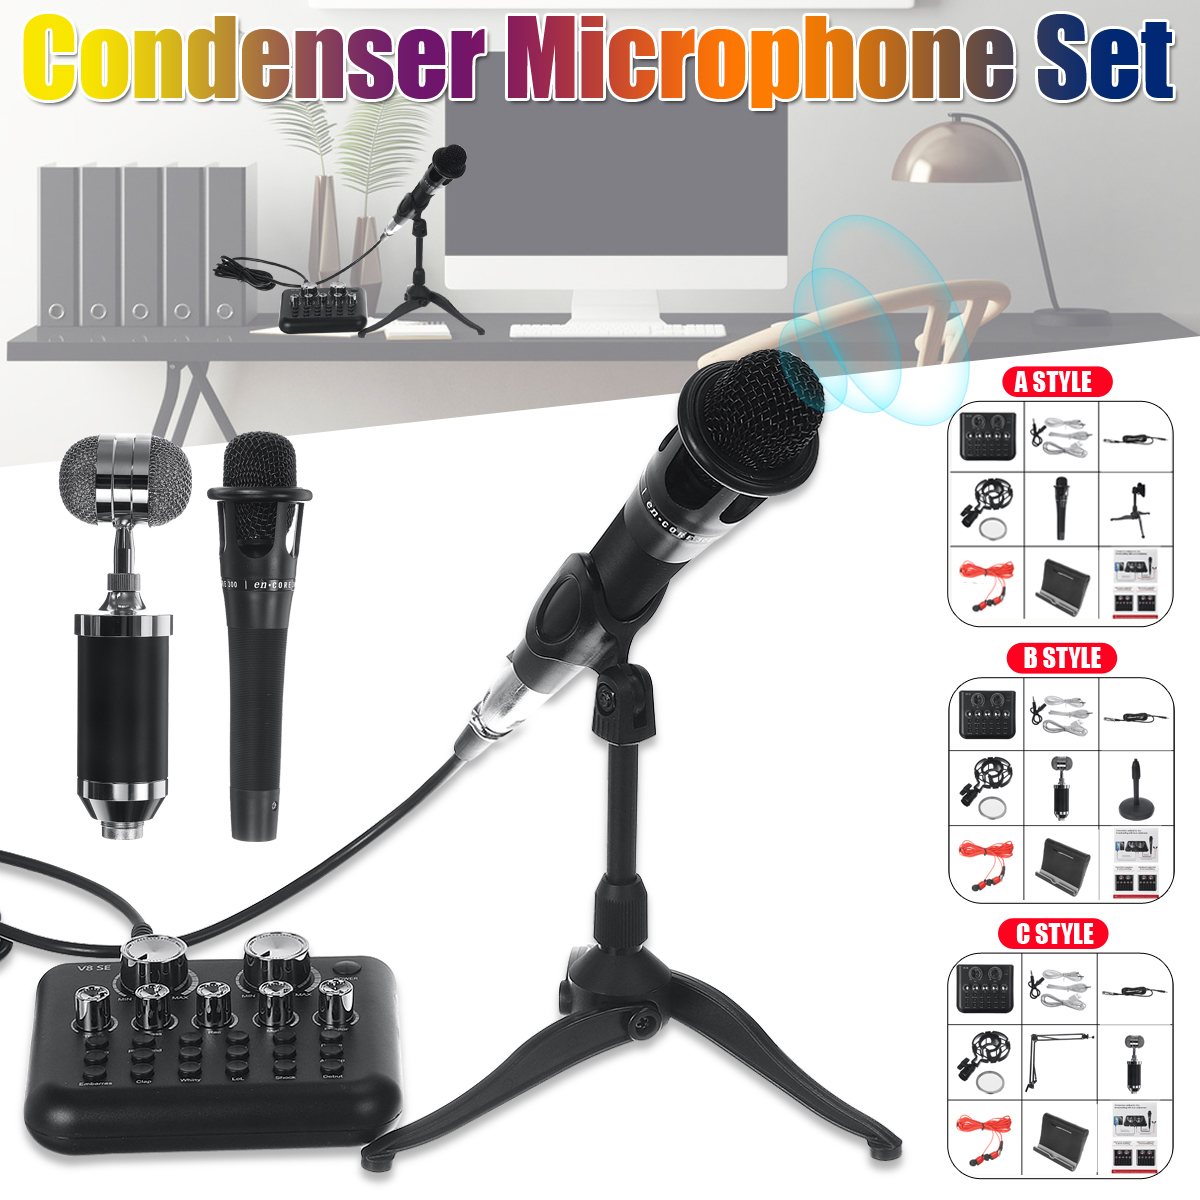 BM800-Live-Sound-Card-Condenser-Microphone-Set-Recording-Mount-Boom-Stand-Mic-Kit-for-Live-Broadcast-1941459-1